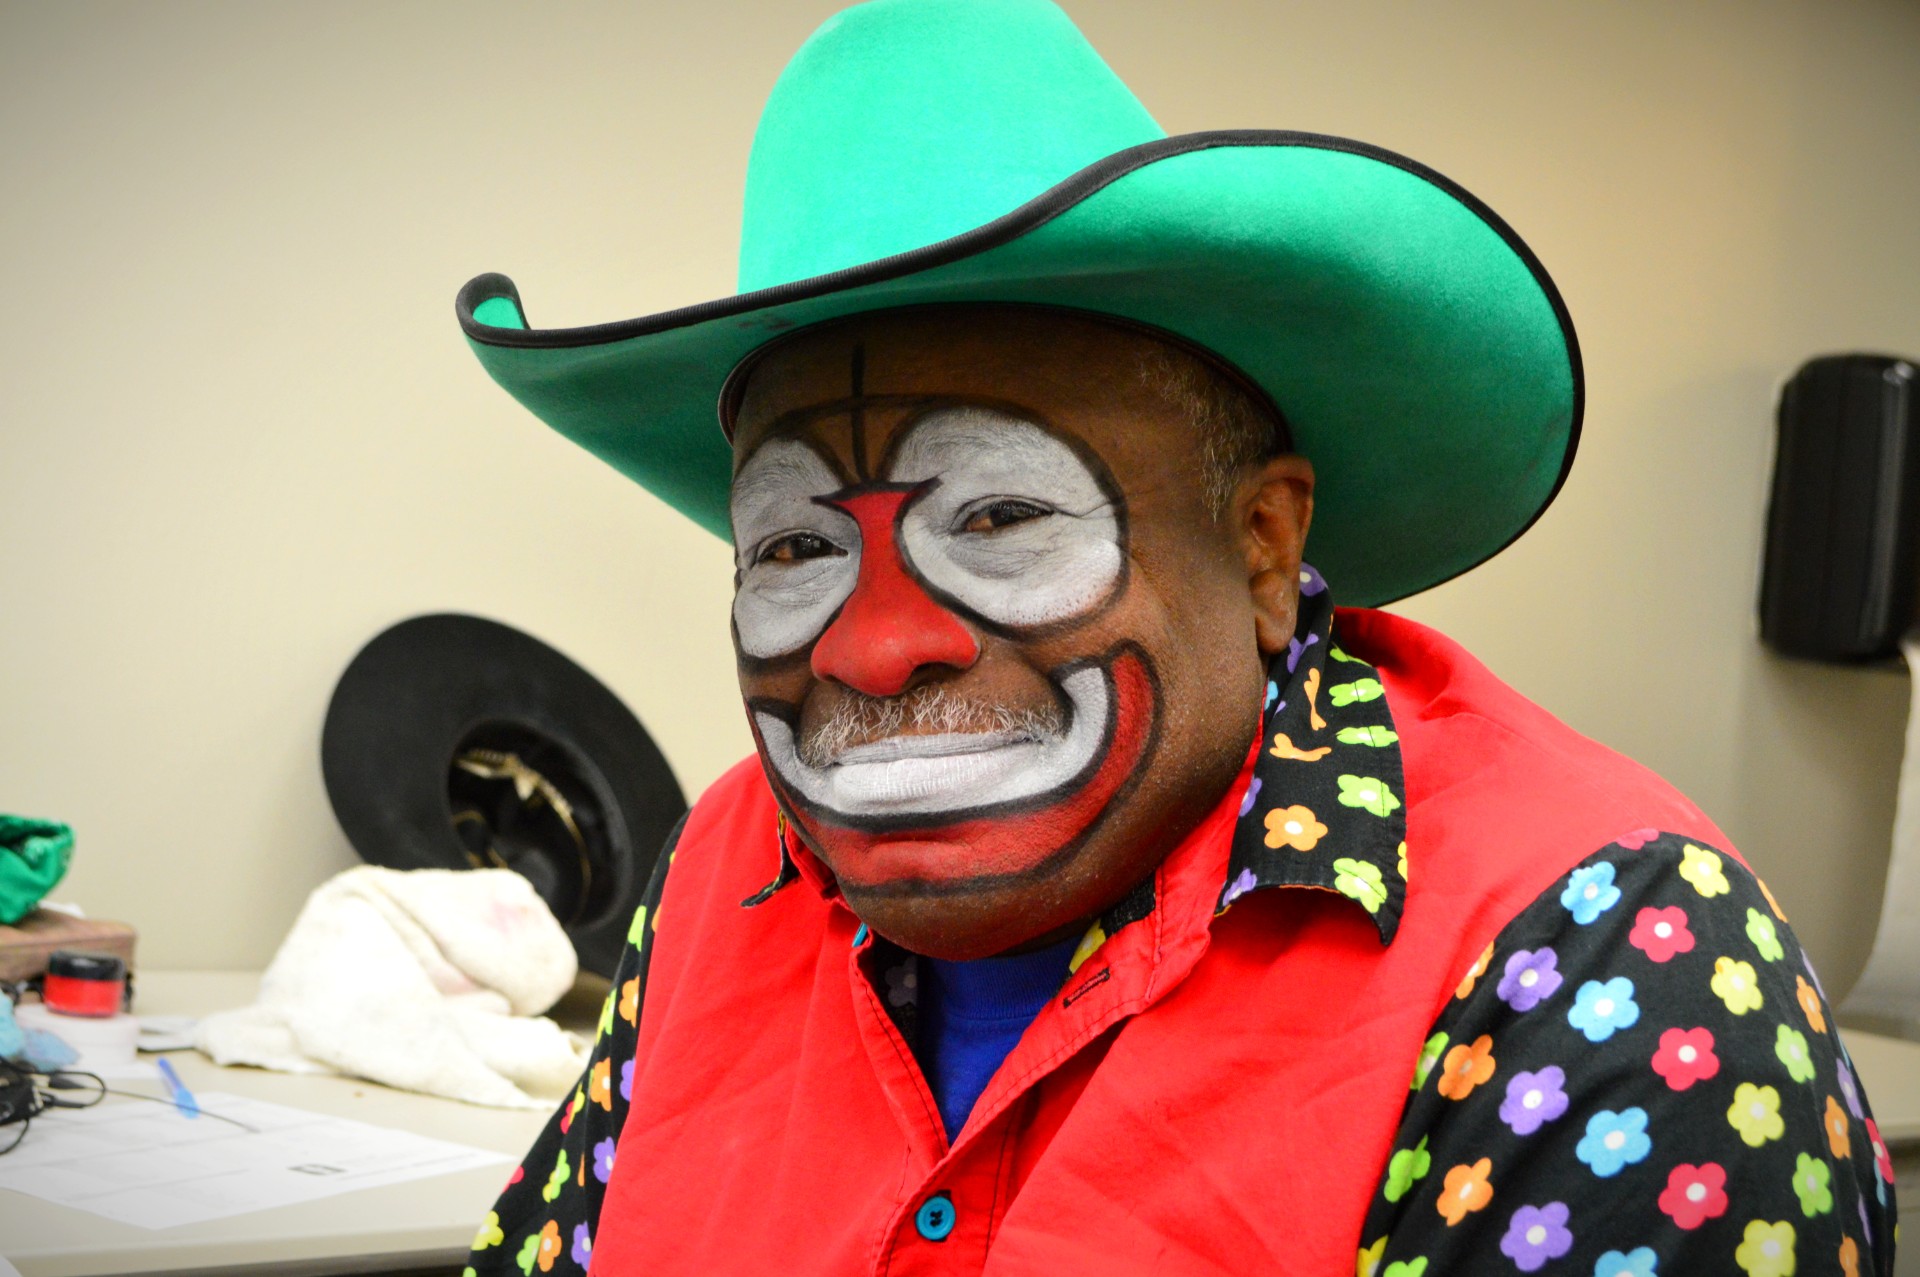 Top 10 Rodeo Clown Outfits